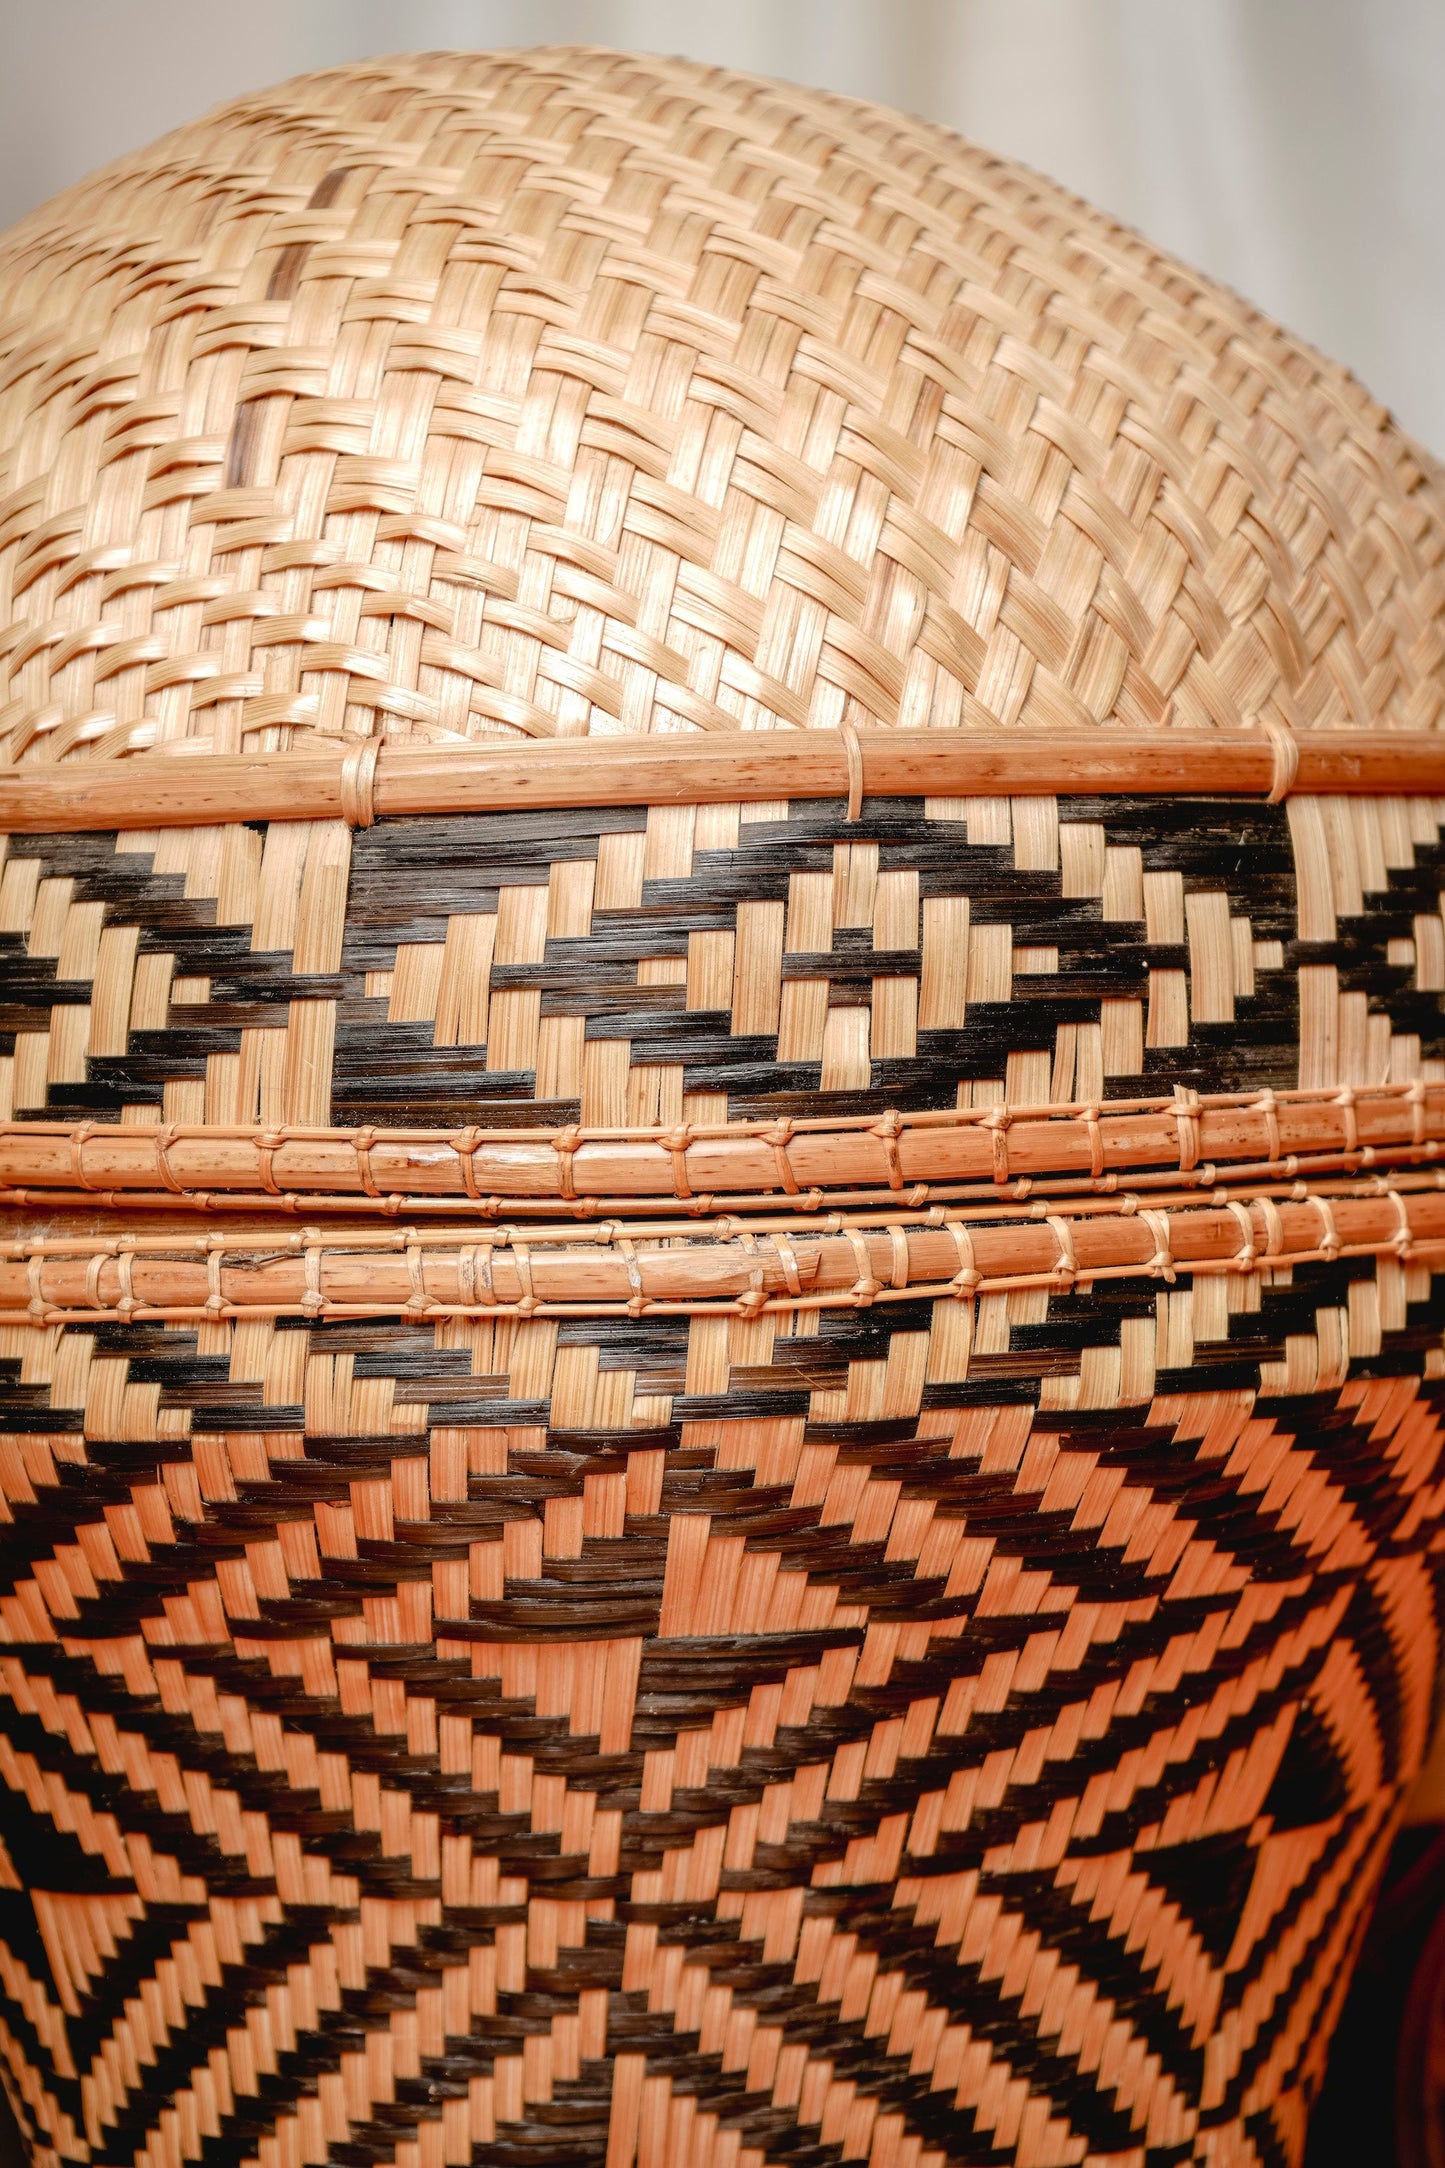 Woven Patterned Dome Lid Basket